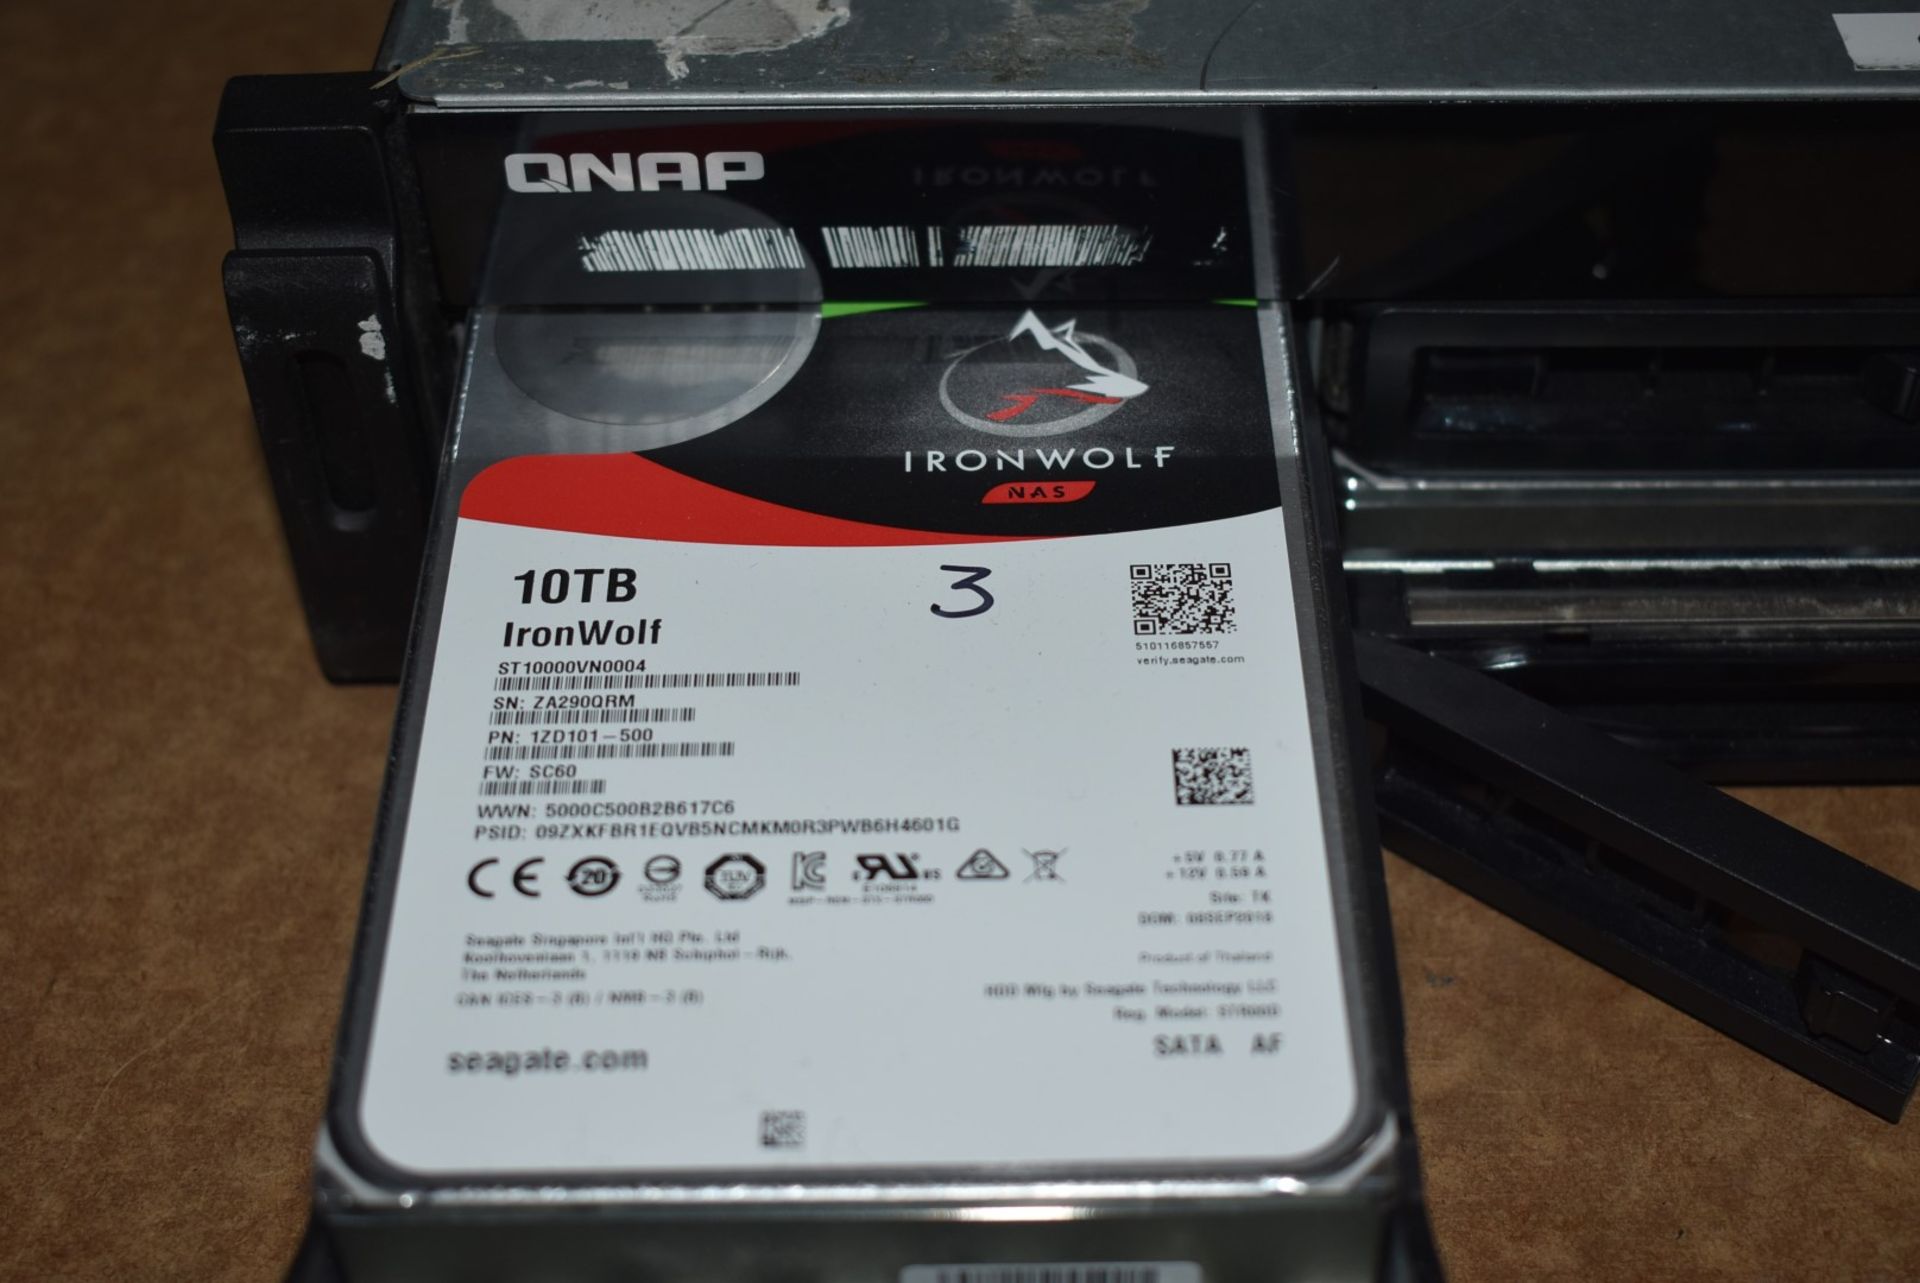 1 x QNAP Network Attached Storage Unit - Model TS-879U-RP - Includes 3 x Ironwolf 10tb Hard Drives - Image 2 of 11